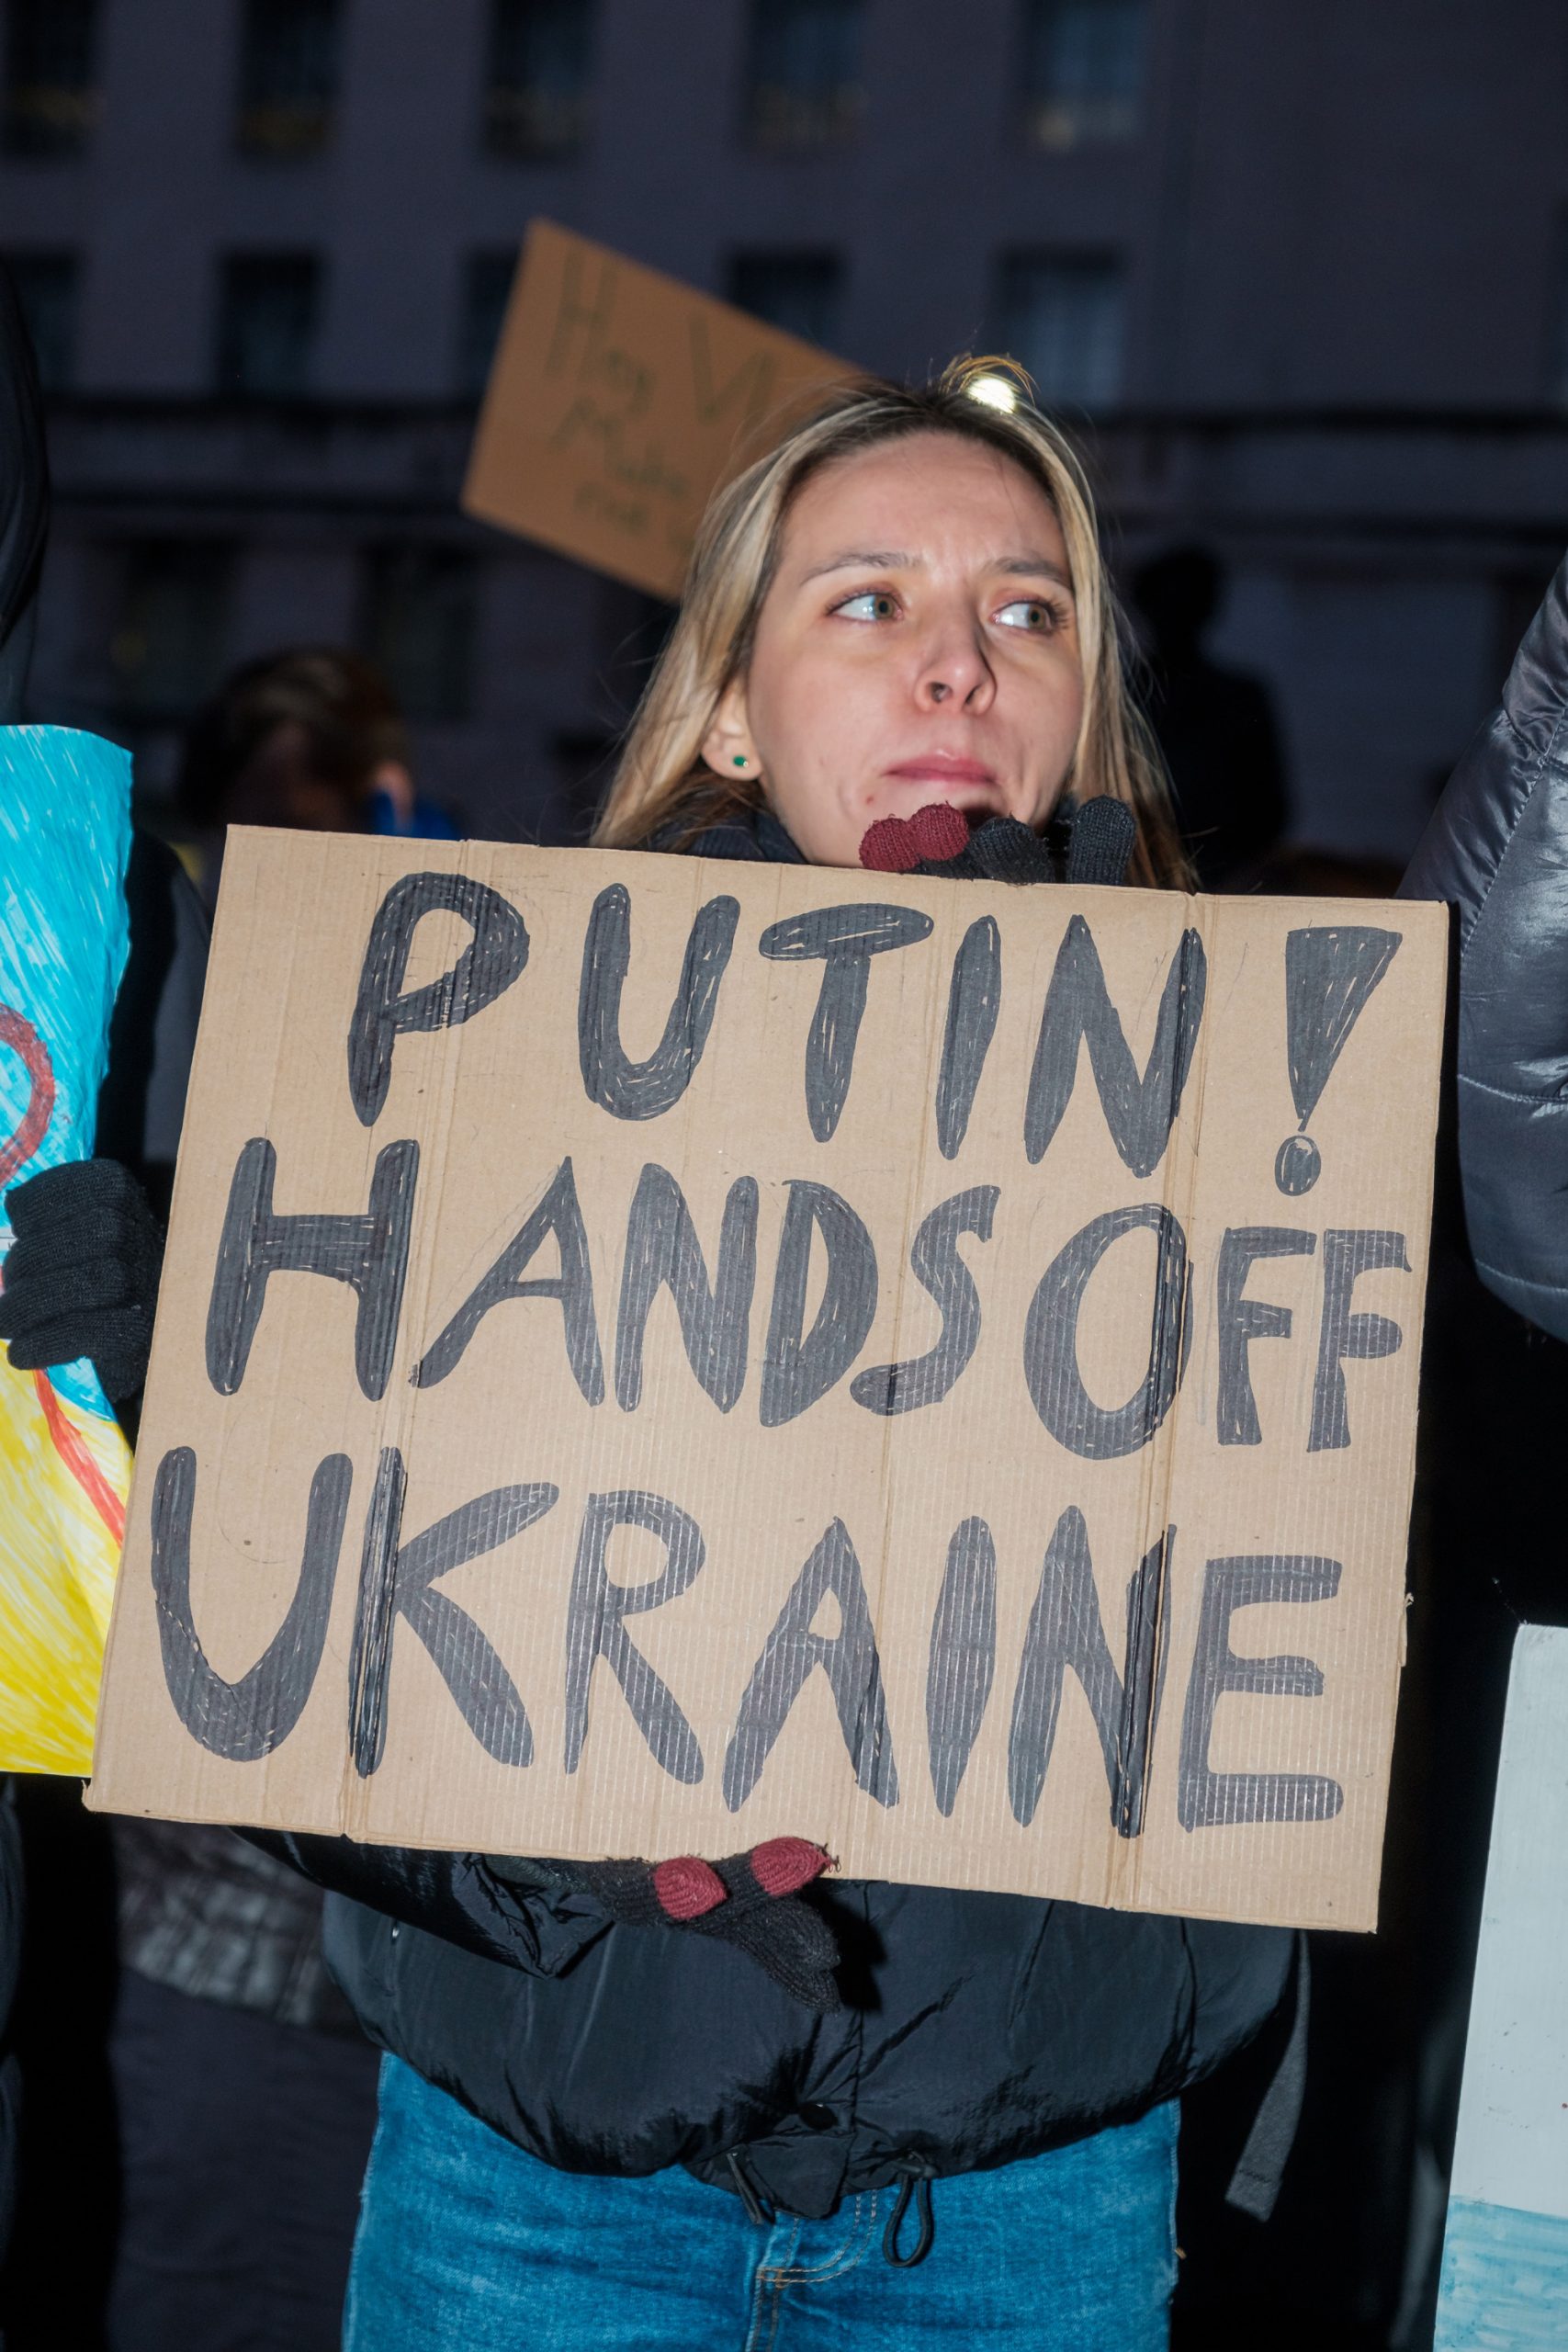 Woman protesting and holding a sign that says Putin! Hands off Ukraine. Image by Ehimetalor Akhere Unuabona.